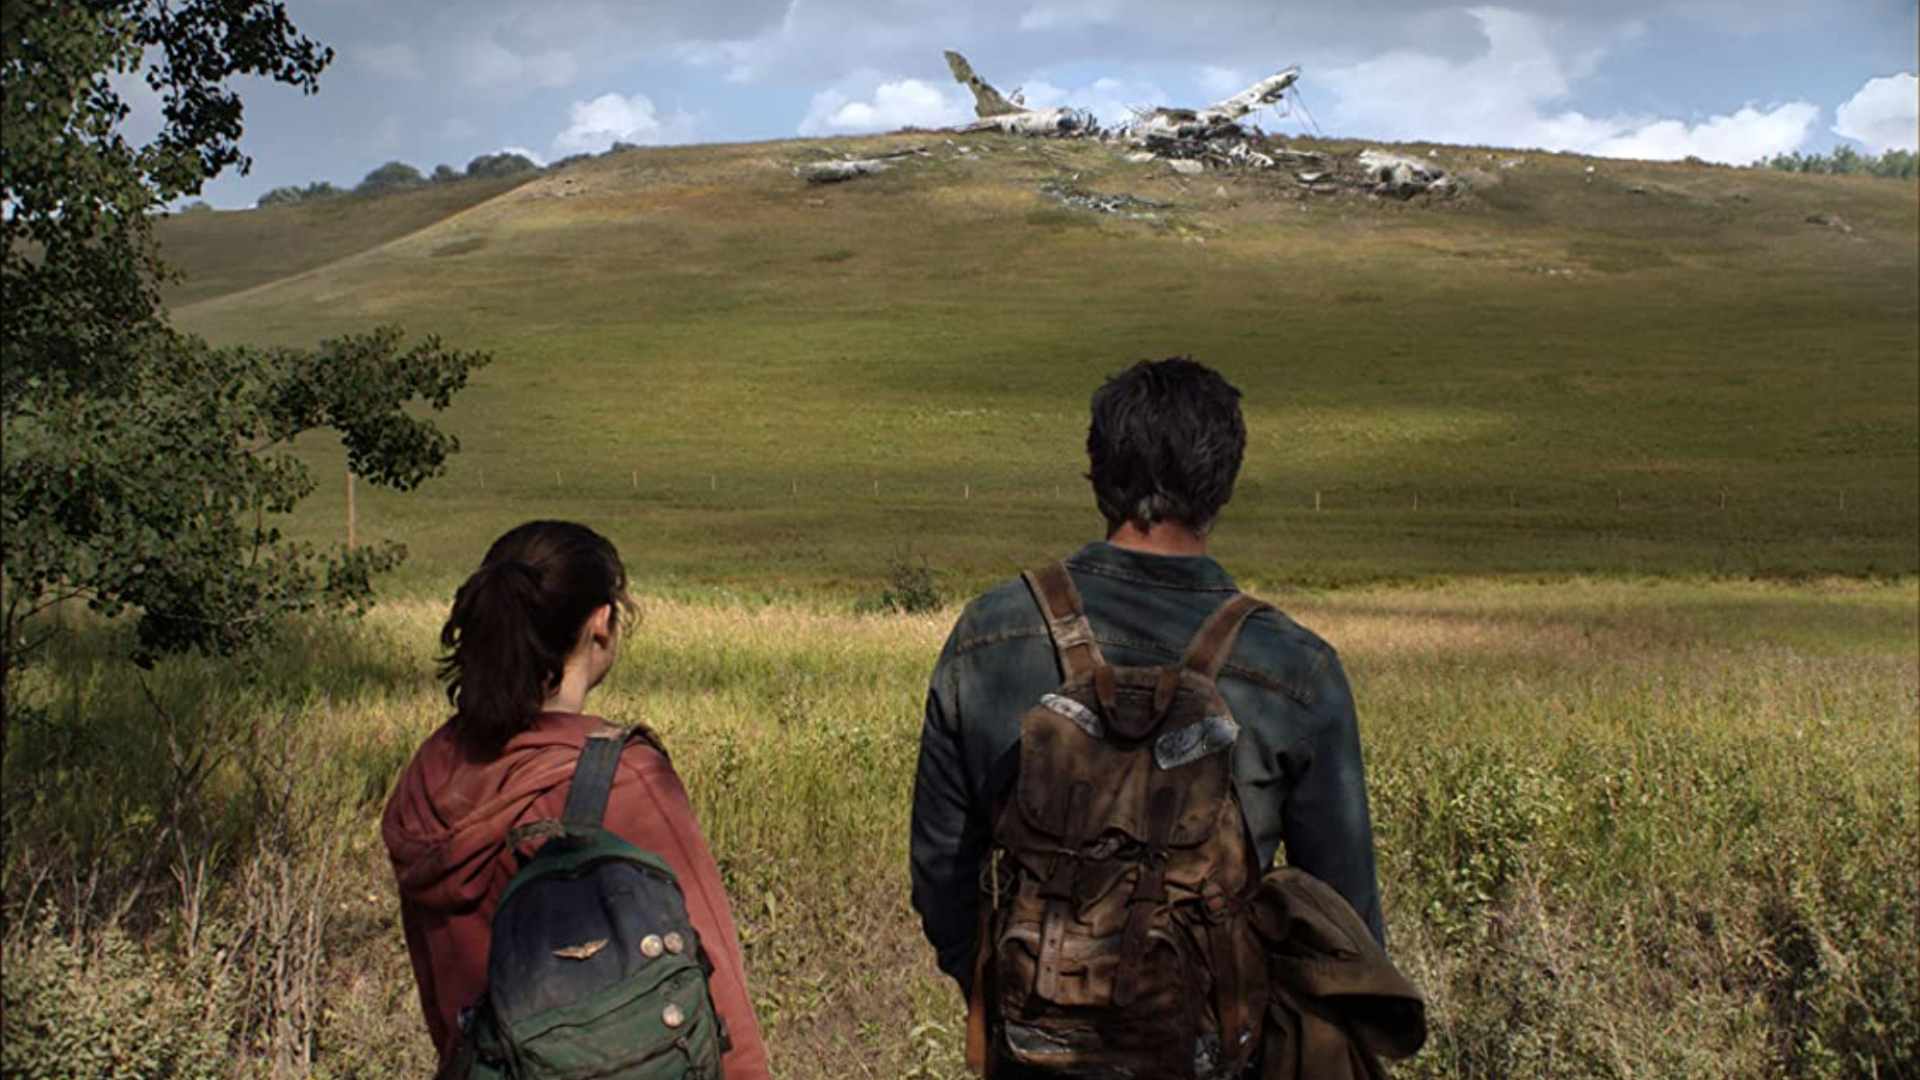 The Last of Us on HBO